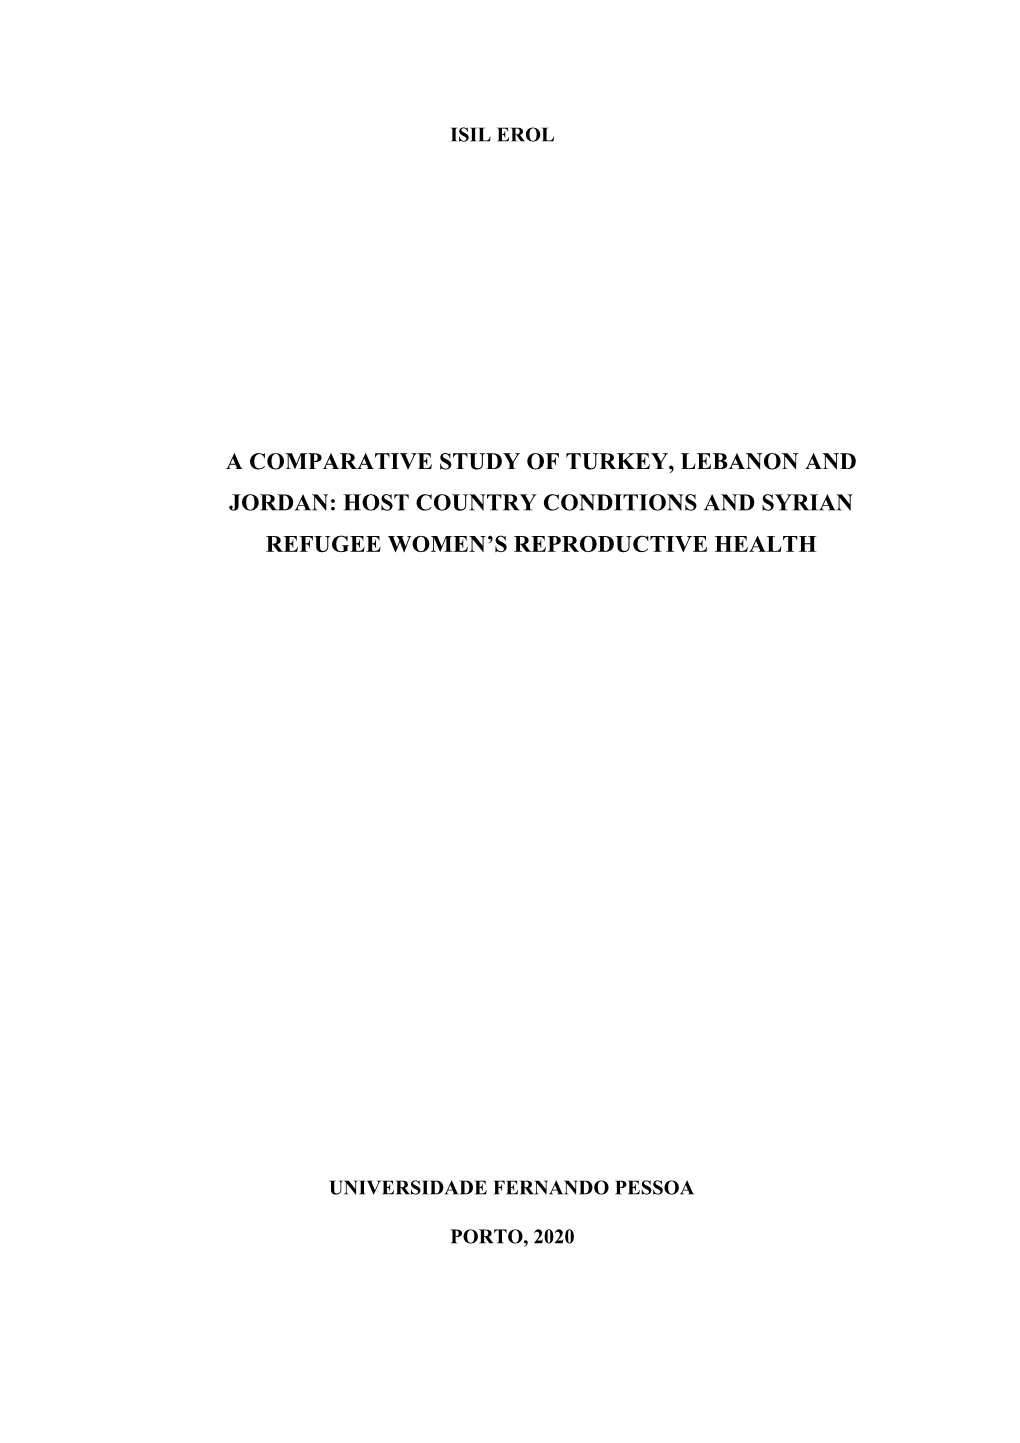 A Comparative Study of Turkey, Lebanon and Jordan: Host Country Conditions and Syrian Refugee Women’S Reproductive Health